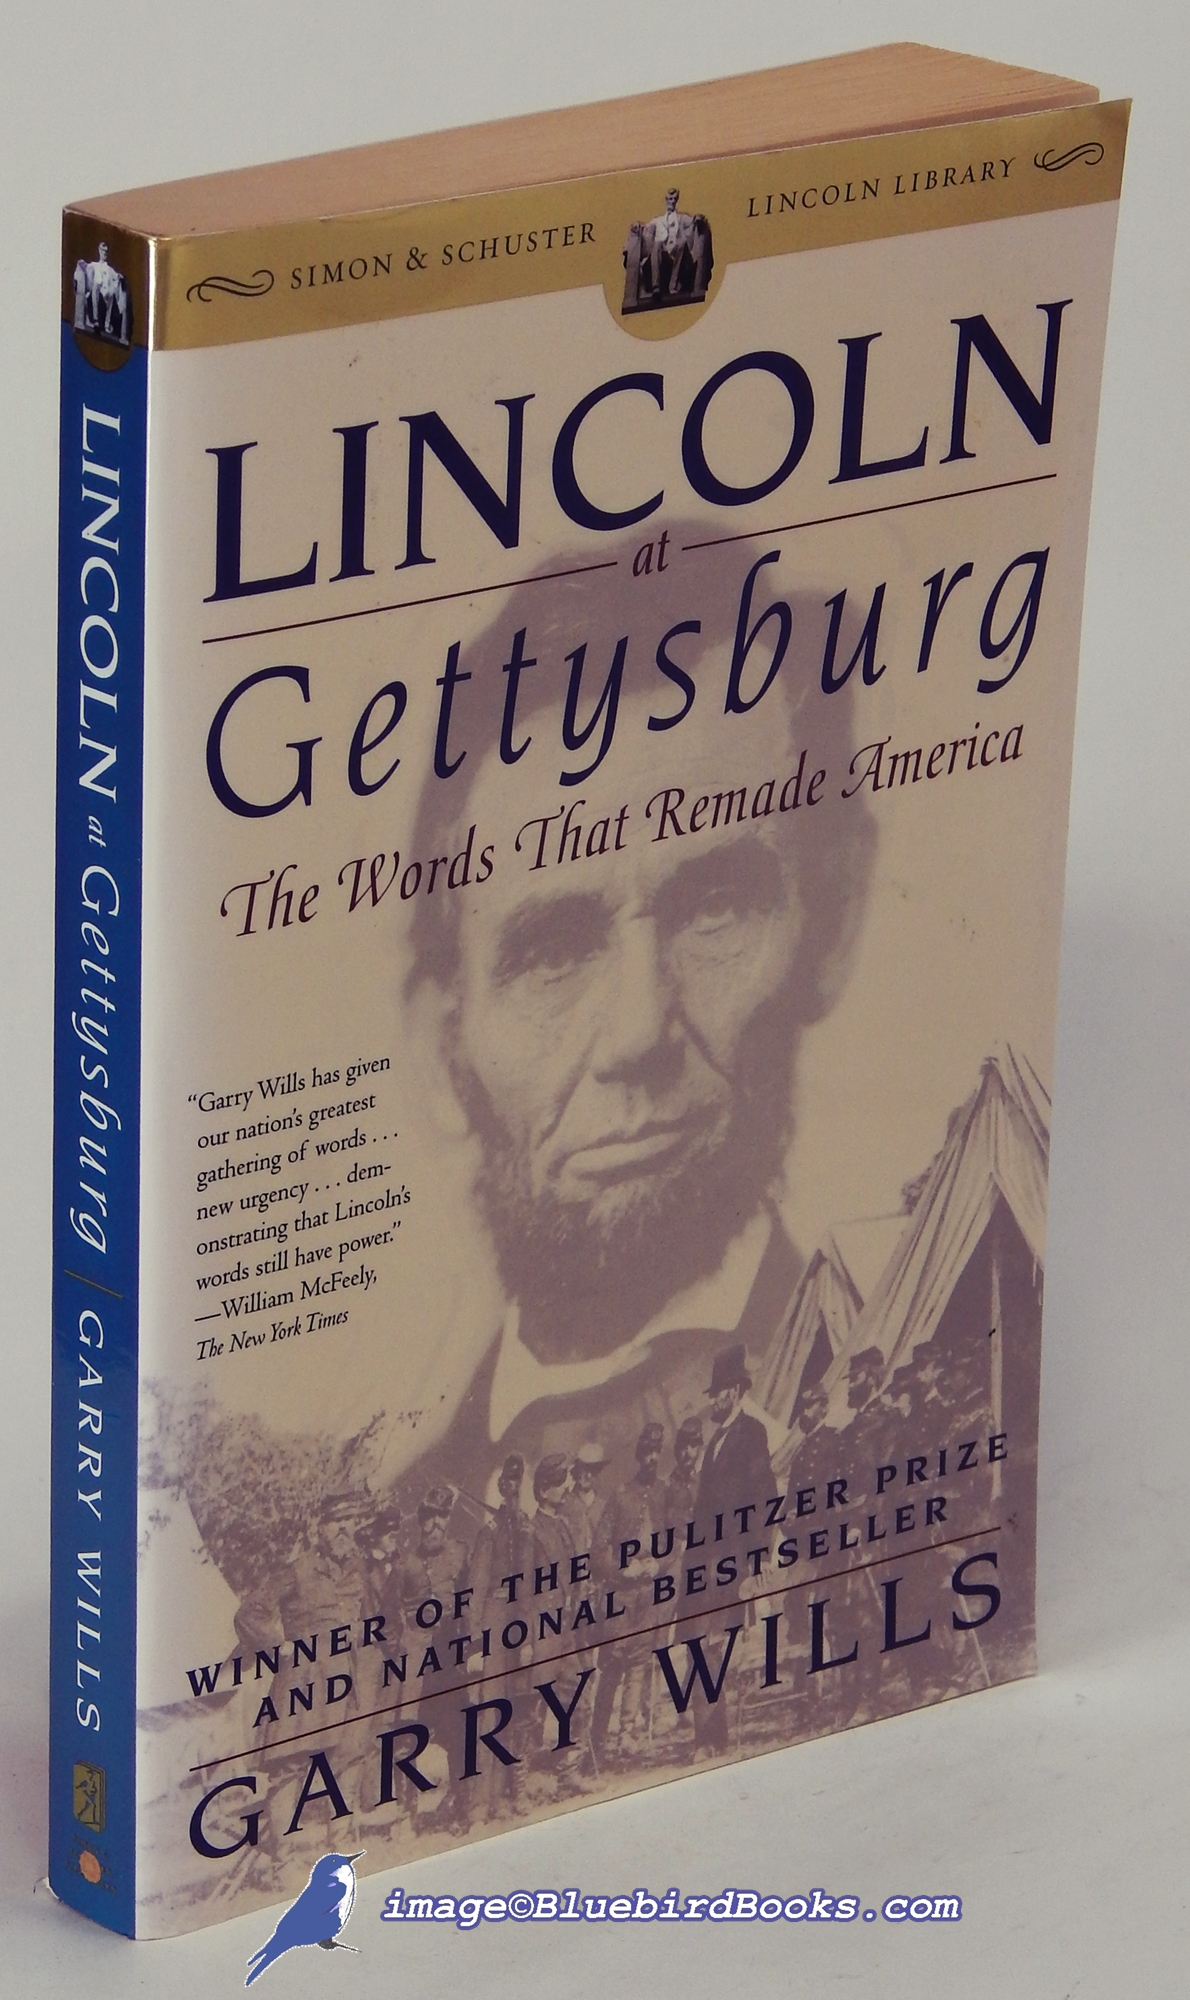 WILLS, GARRY - Lincoln at Gettysburg: The Words That Remade America (Simon & Schuster Lincoln Library Series)